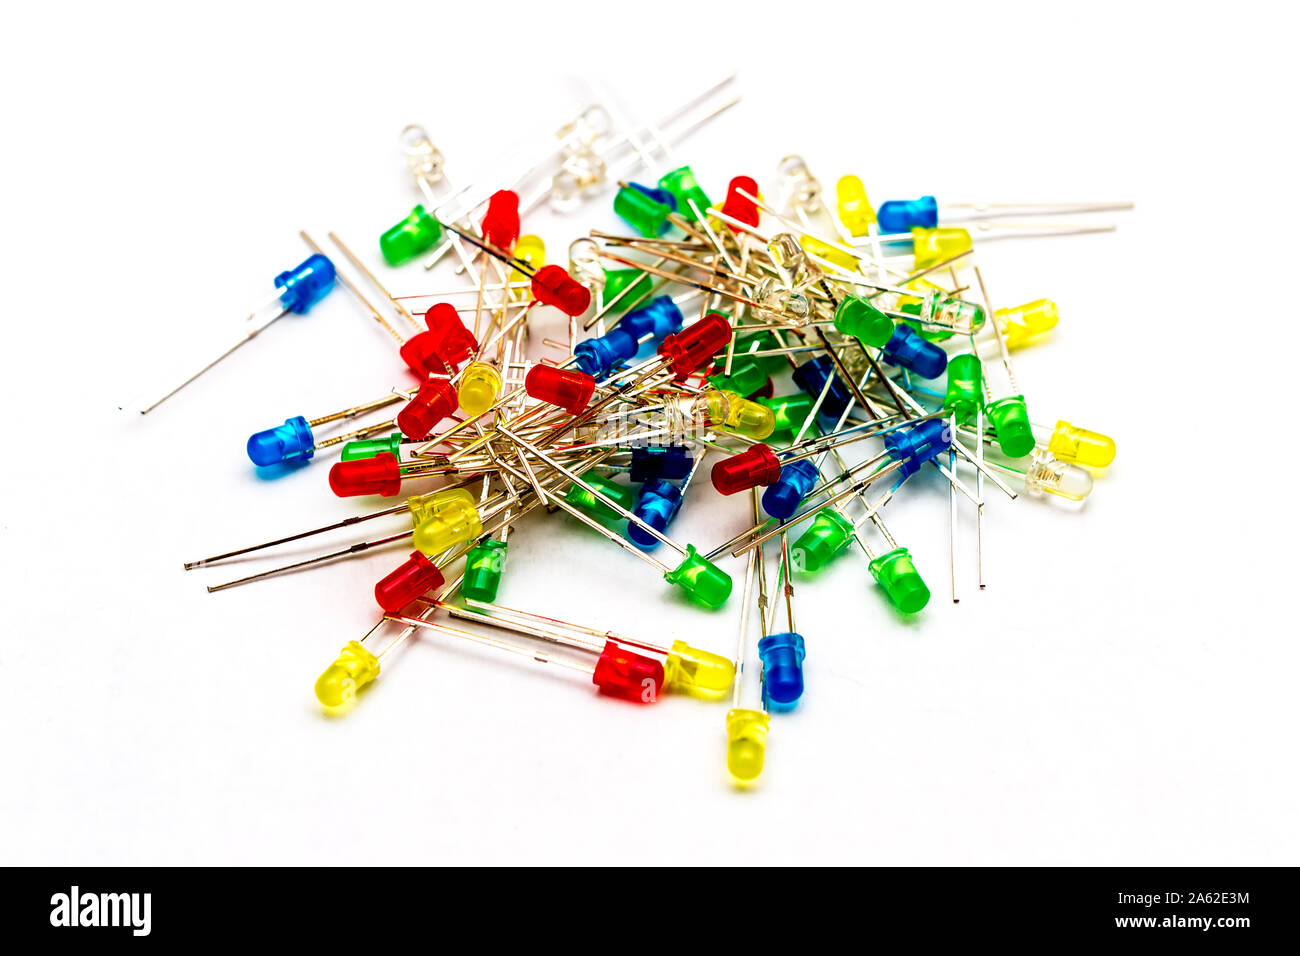 Pile of multicolored 3mm LEDs - ight-emitting diode Stock Photo